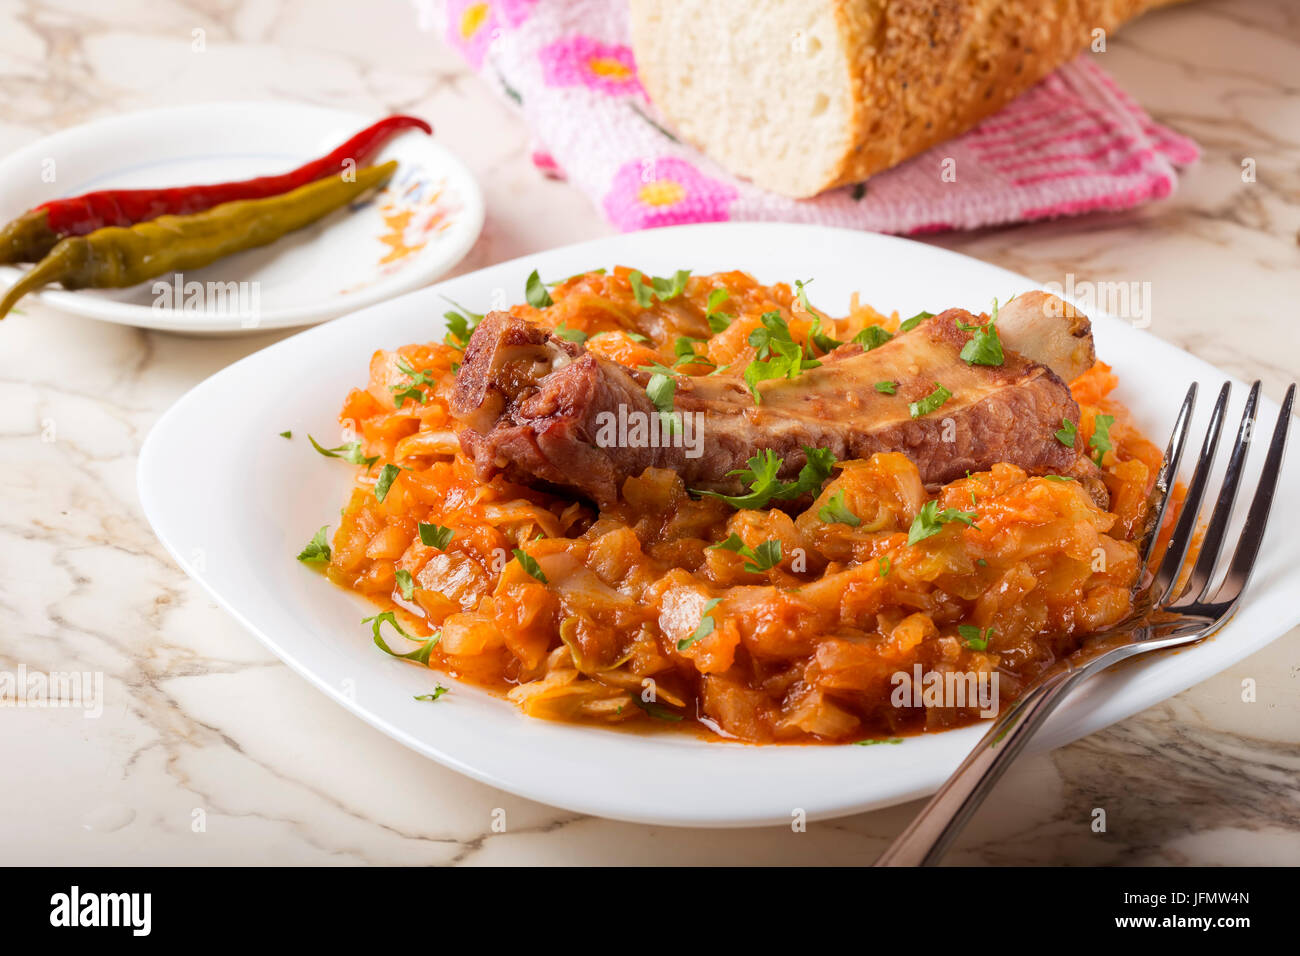 Cabbage stew with Smoked Pork Ribs and green parsley Served in white plate with pickled chili peppers and bread Stock Photo